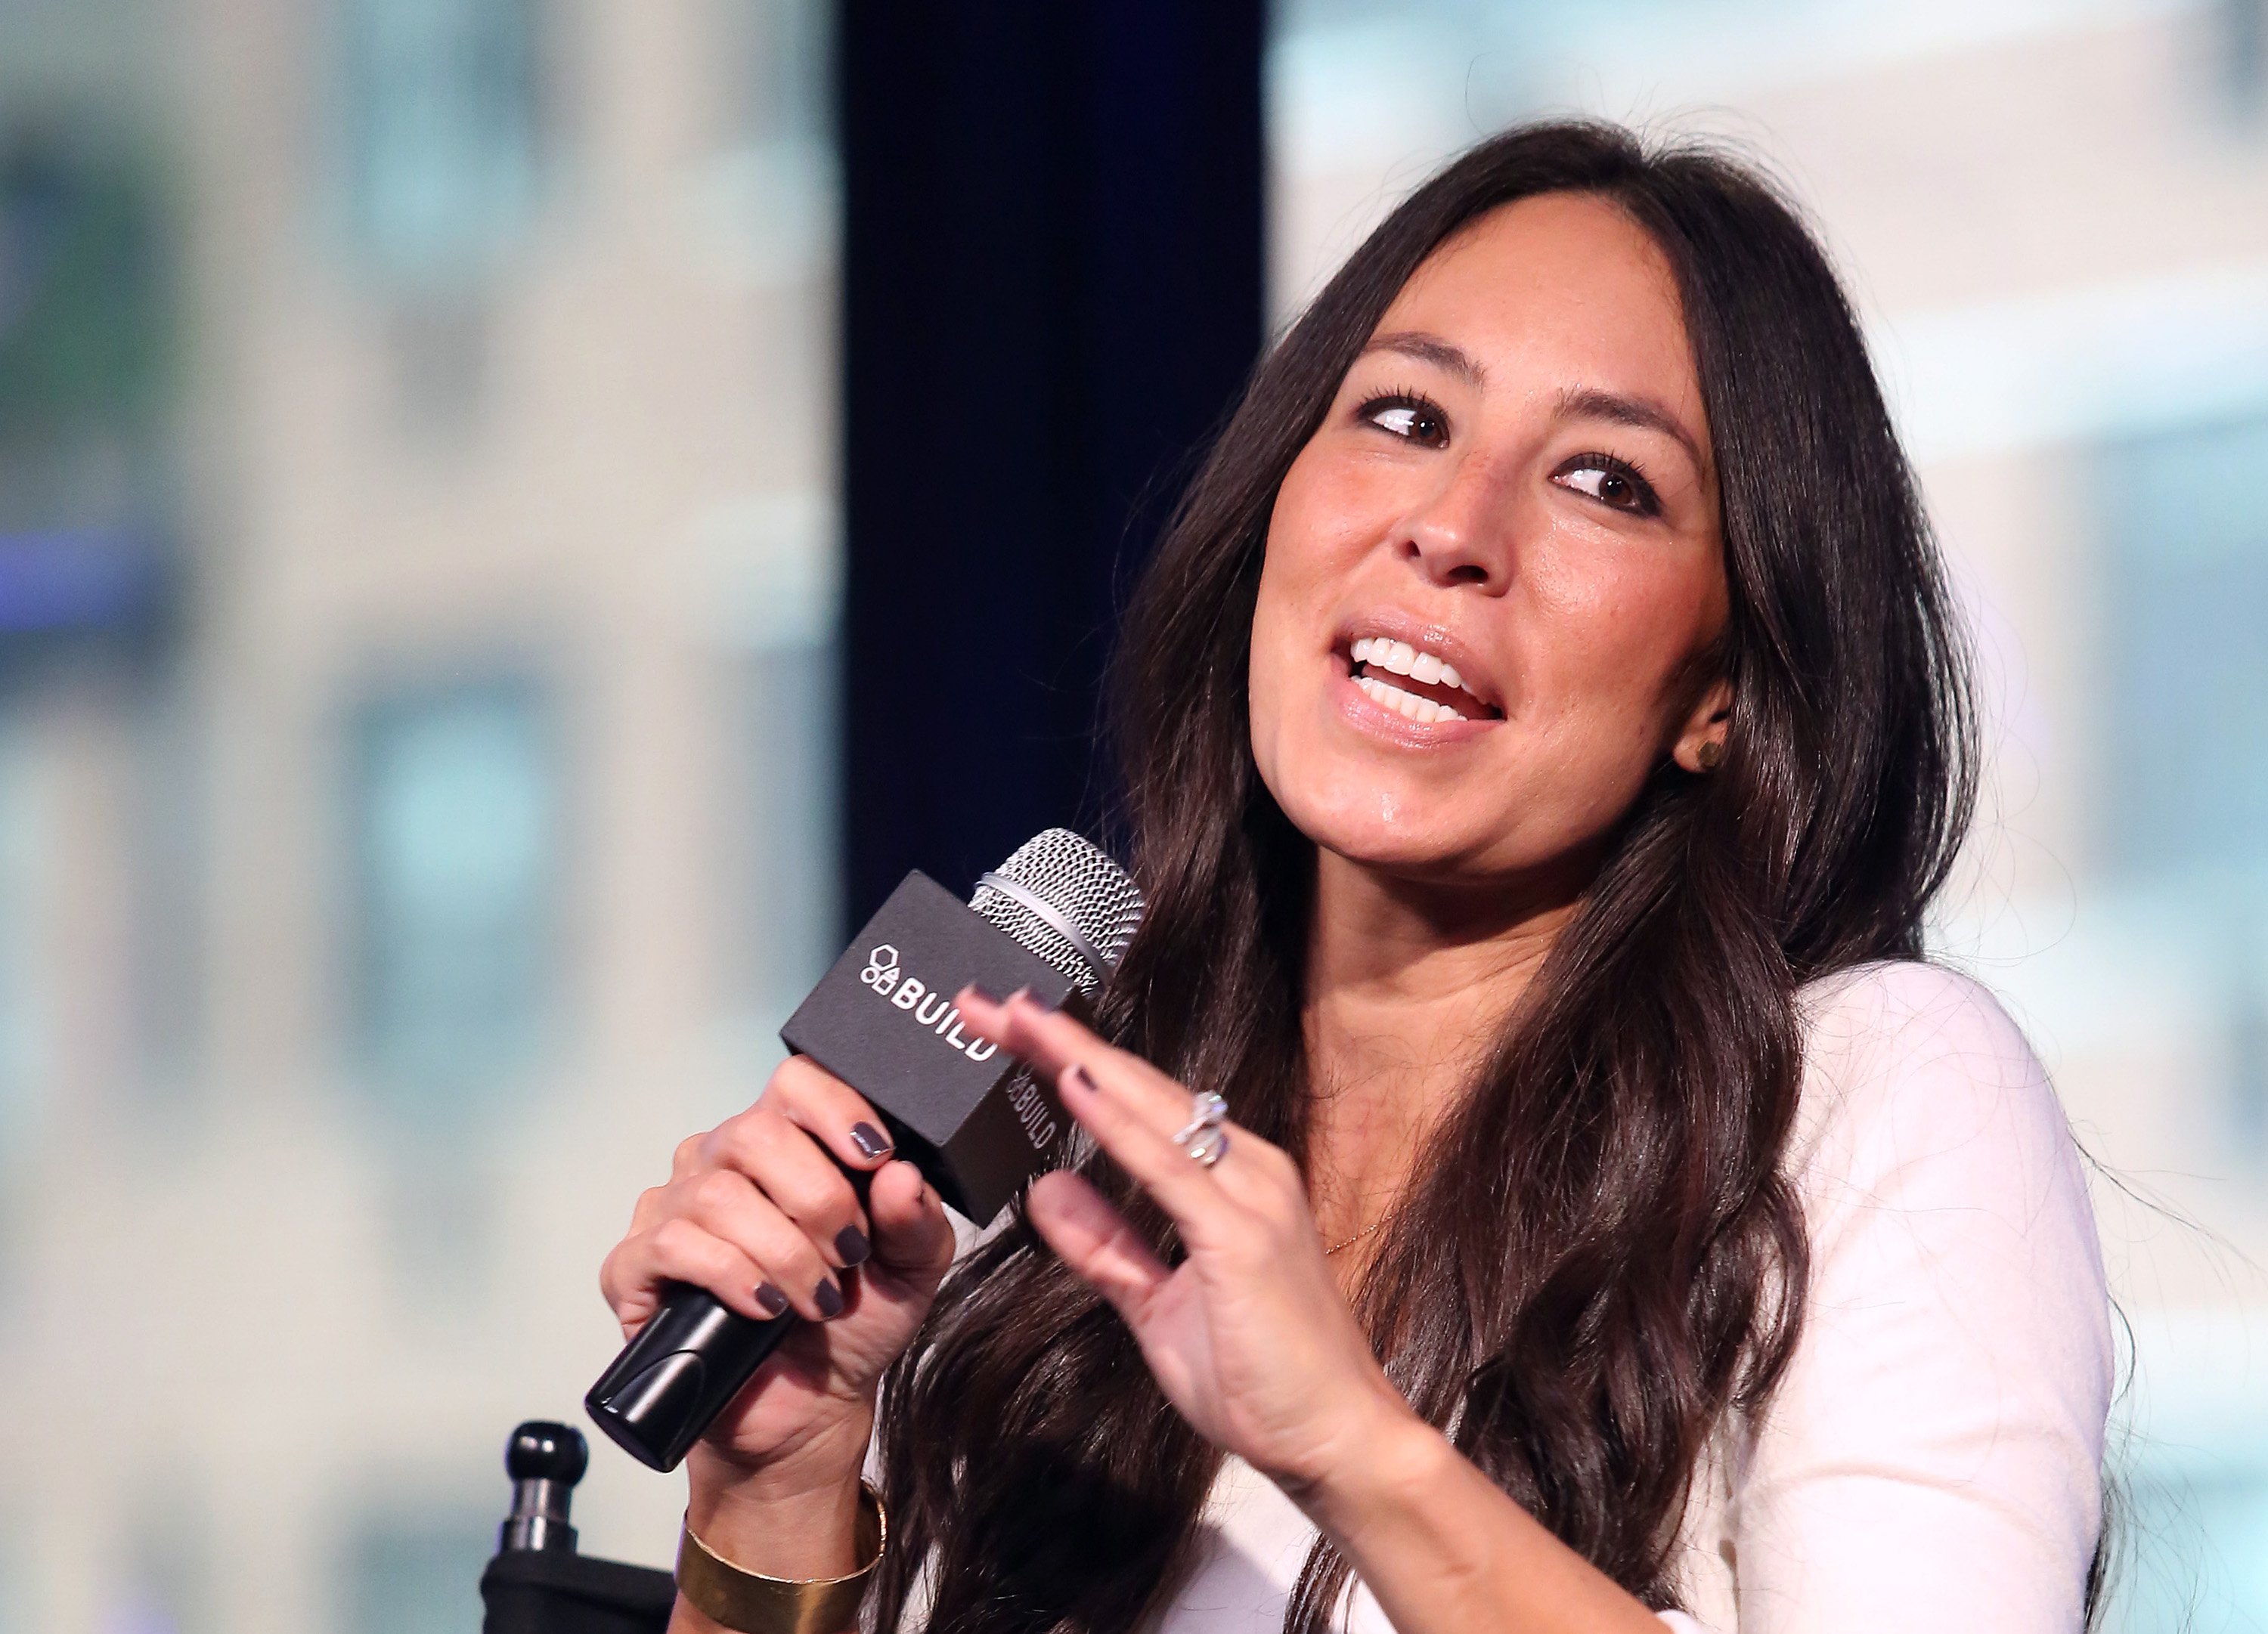 Joanna Gaines appear to promote "The Magnolia Story" during the AOL BUILD Series at AOL HQ on October 19, 2016 in New York City | Photo: GettyImages